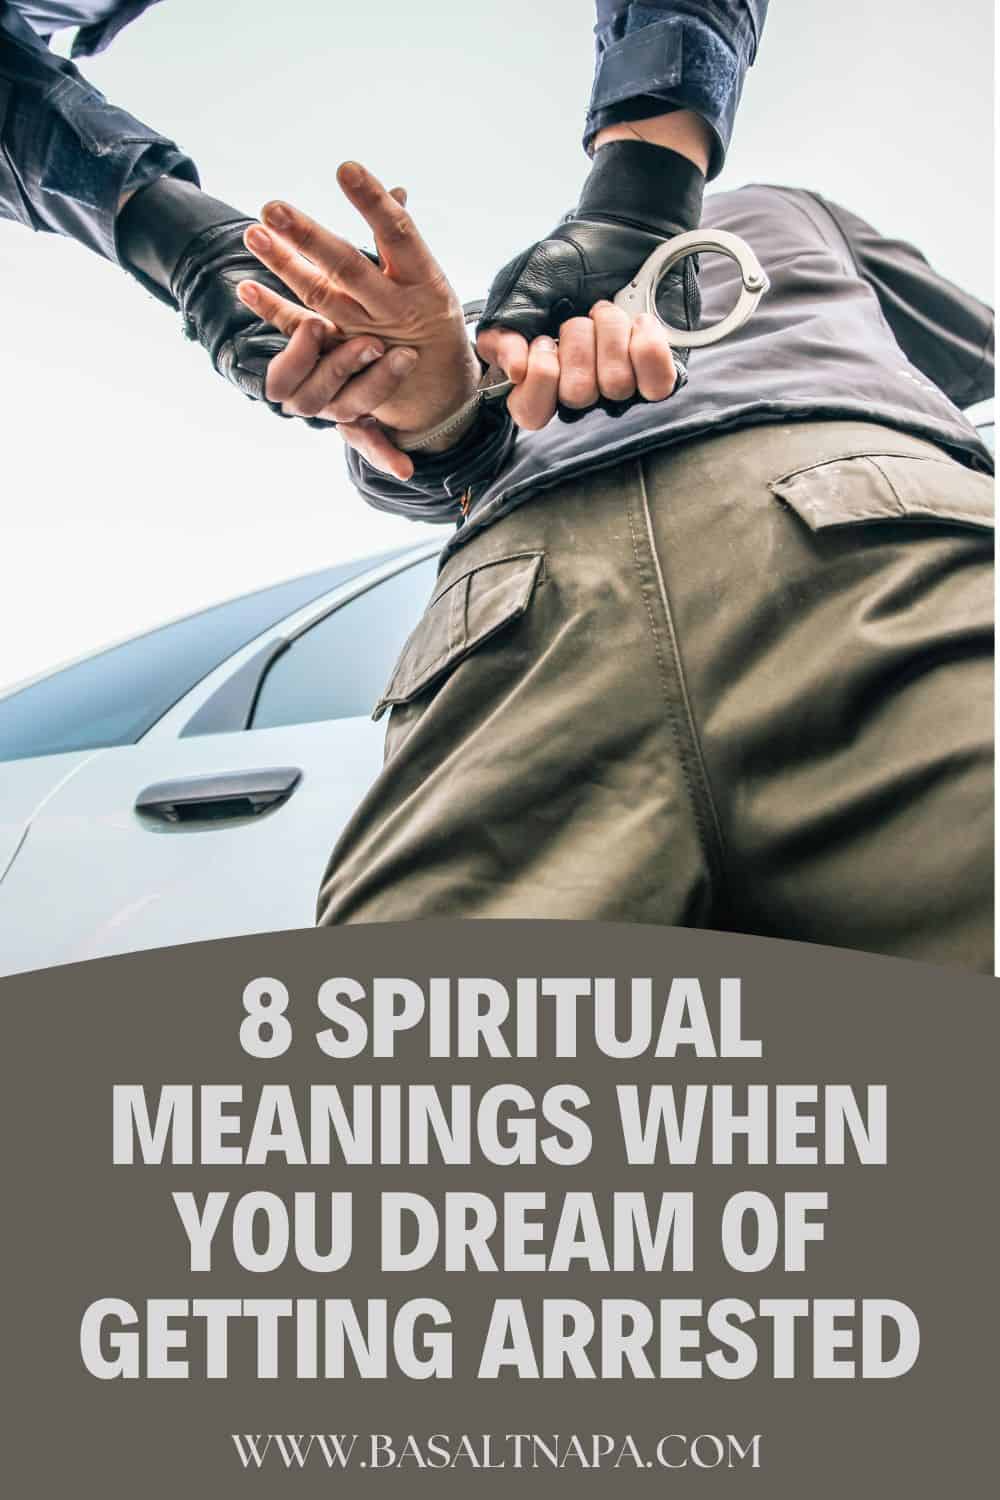 8 Spiritual Meanings When You Dream Of Getting Arrested